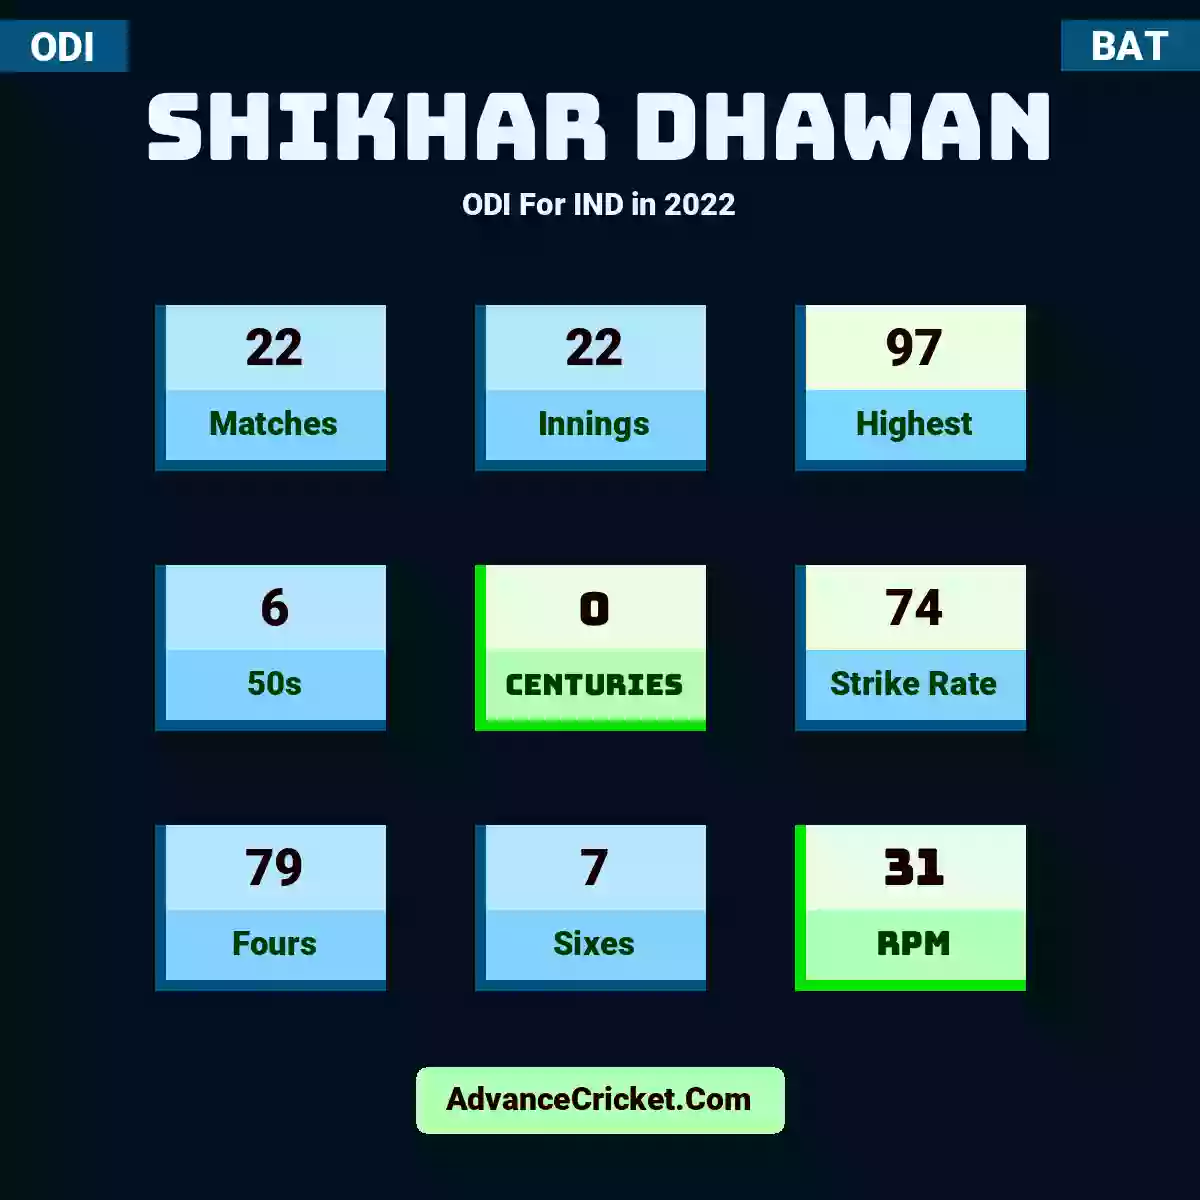 Shikhar Dhawan ODI  For IND in 2022, Shikhar Dhawan played 22 matches, scored 97 runs as highest, 6 half-centuries, and 0 centuries, with a strike rate of 74. S.Dhawan hit 79 fours and 7 sixes, with an RPM of 31.